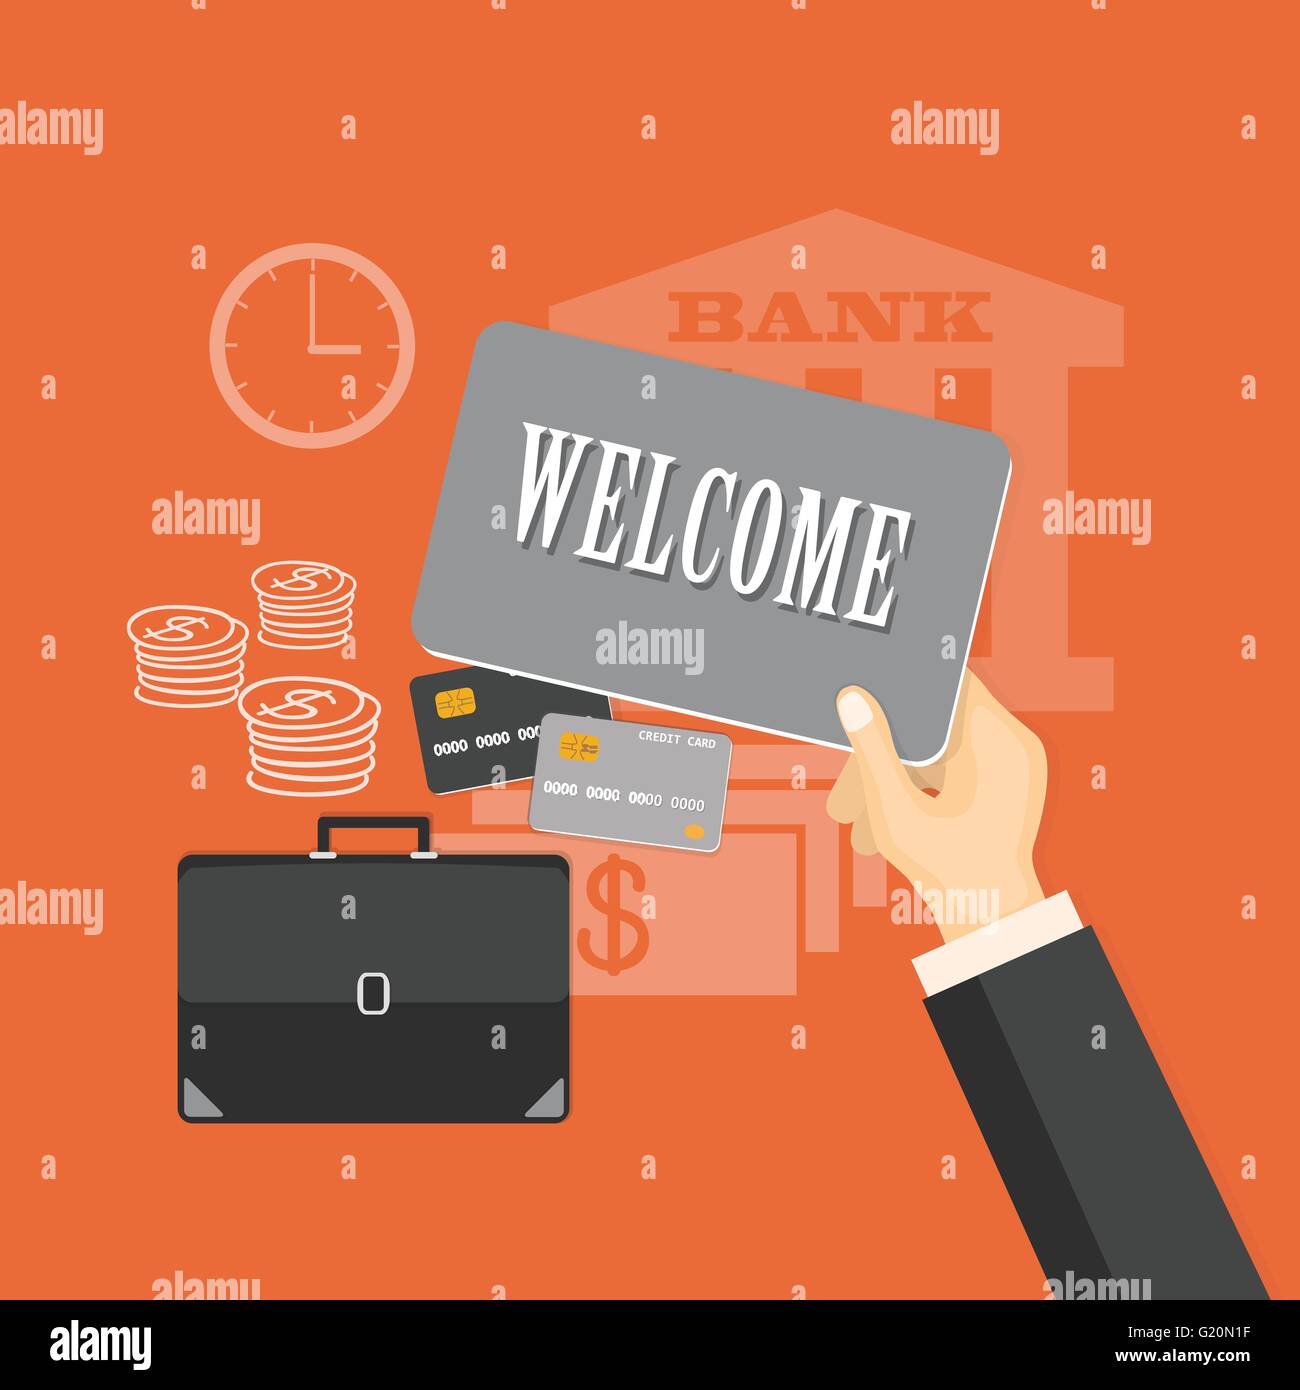 Flat design modern vector illustration concept of business investment, internet banking with credit card in the hand. EPS 10 Stock Vector